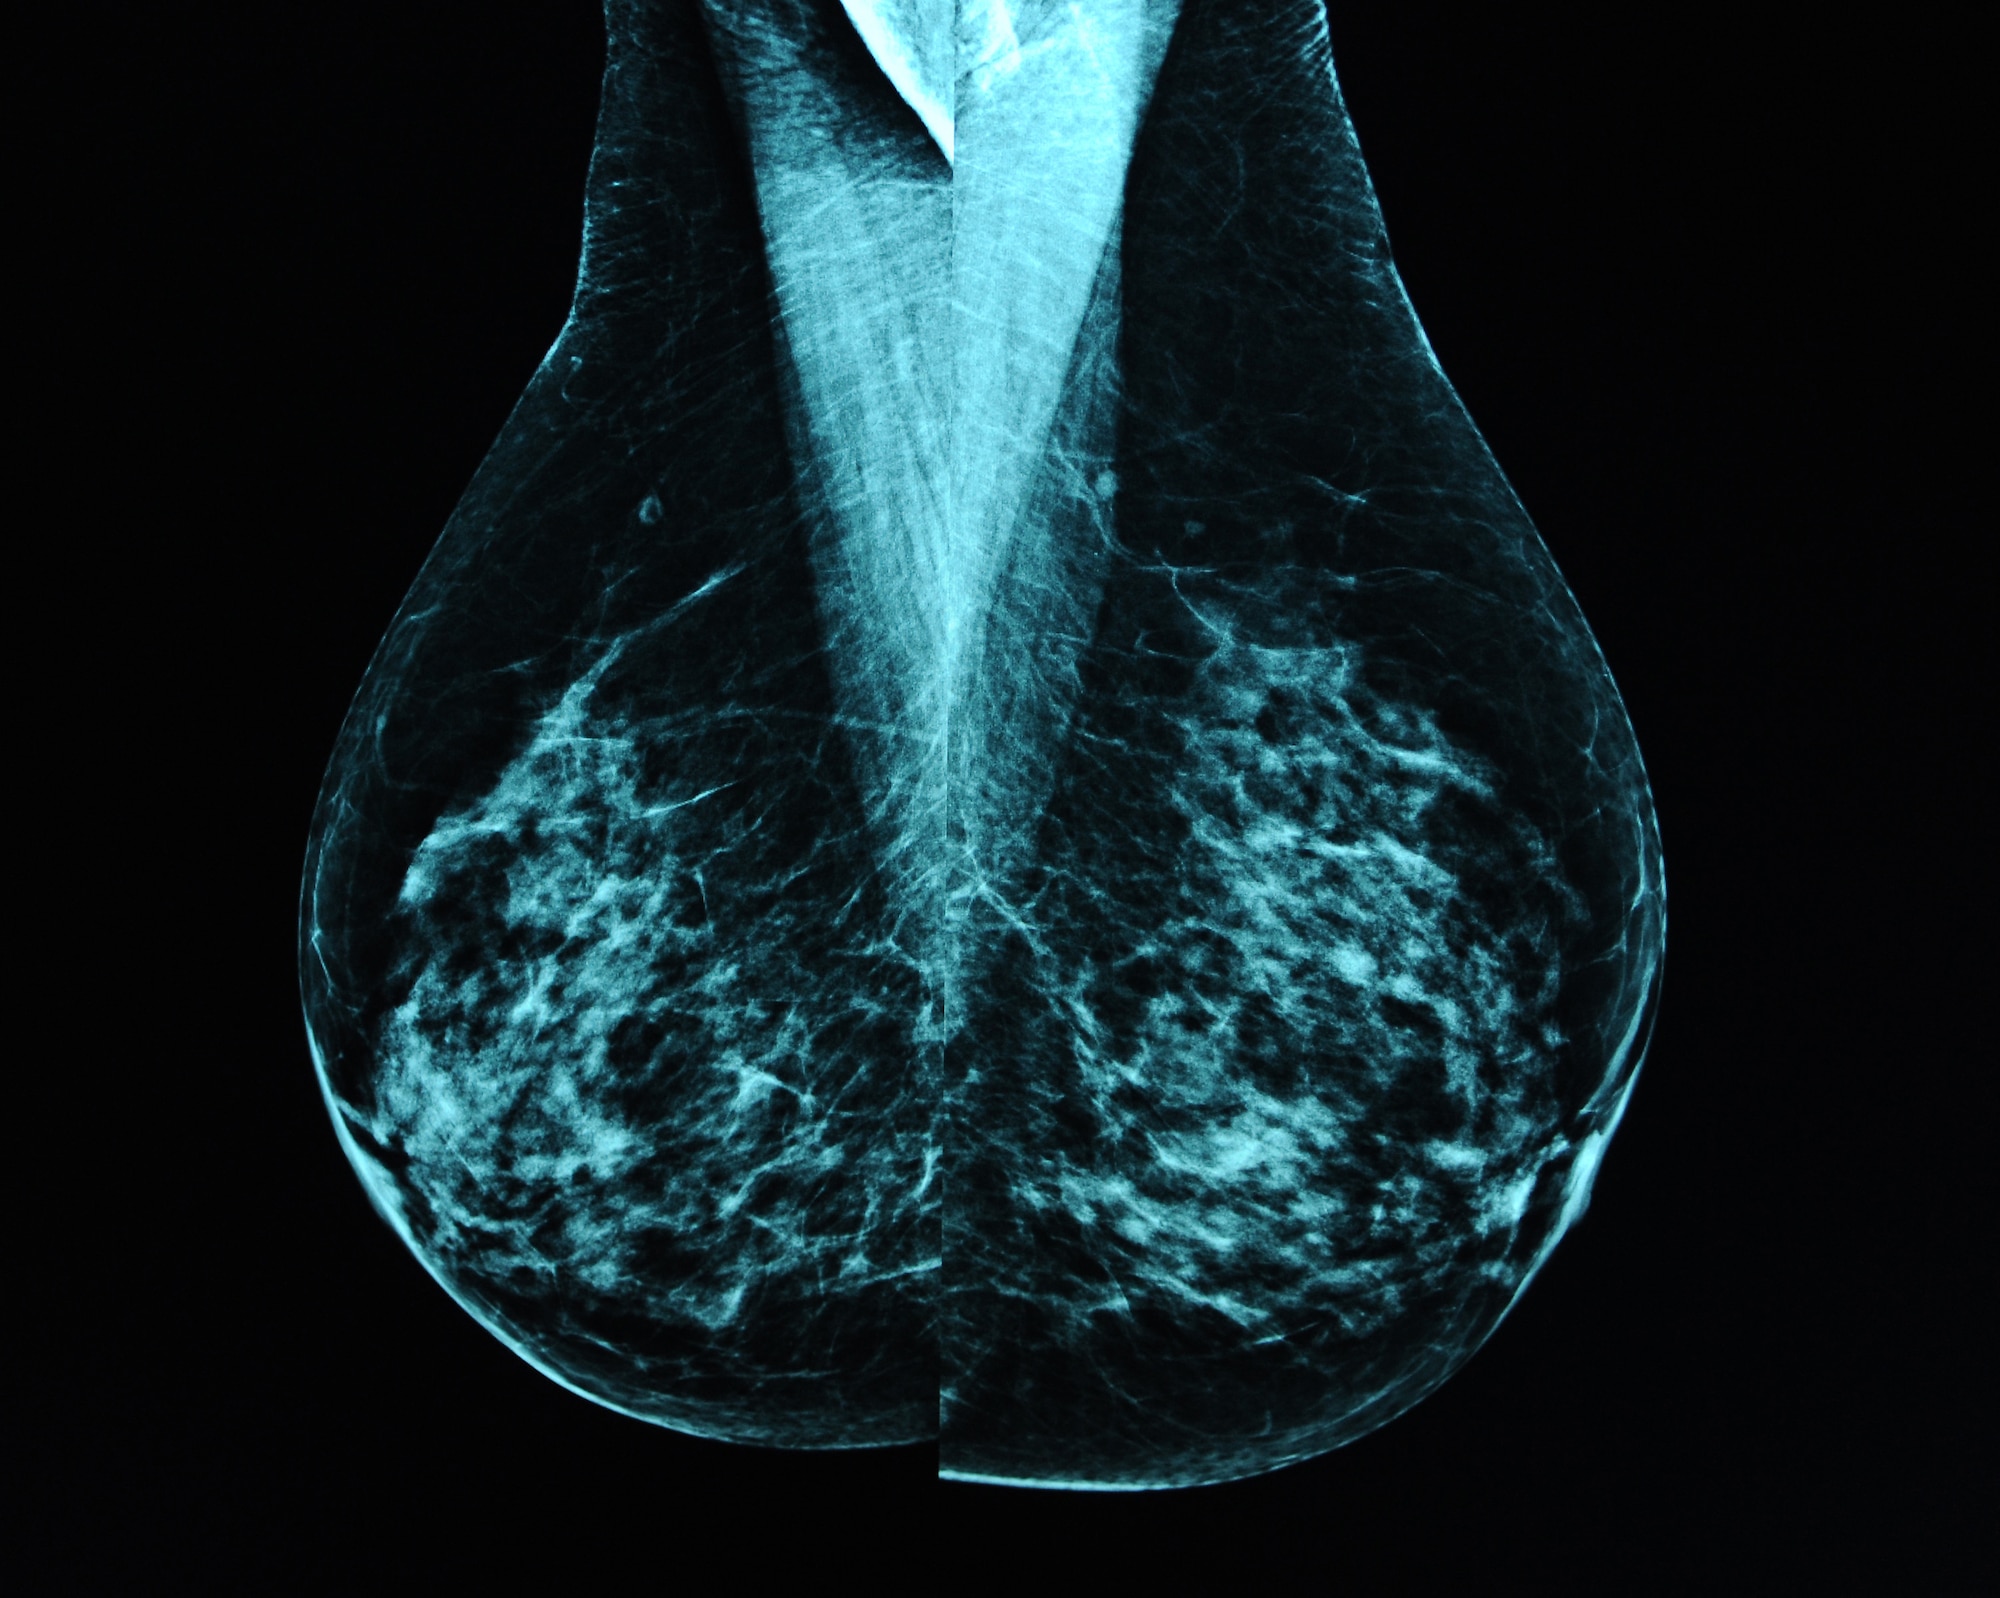 A mammographic image is displayed on state of the art mammography monitors at the David Grant USAF Medical Center. (U.S. Air Force photo/Staff Sgt. Liliana Moreno)